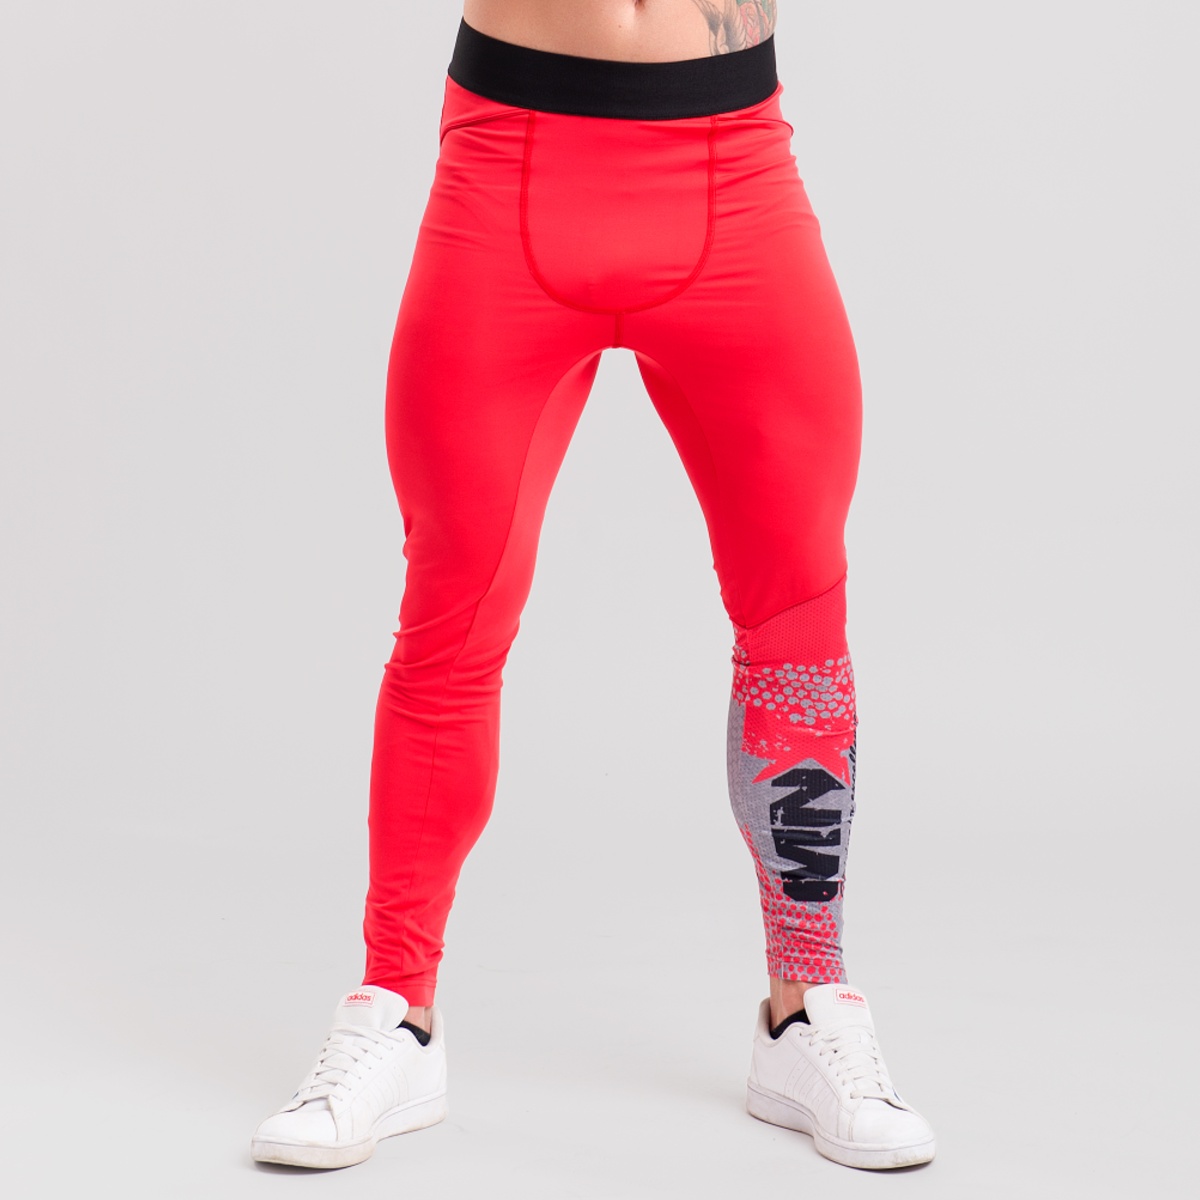 MNX Legging homme ION 2.0 rouge